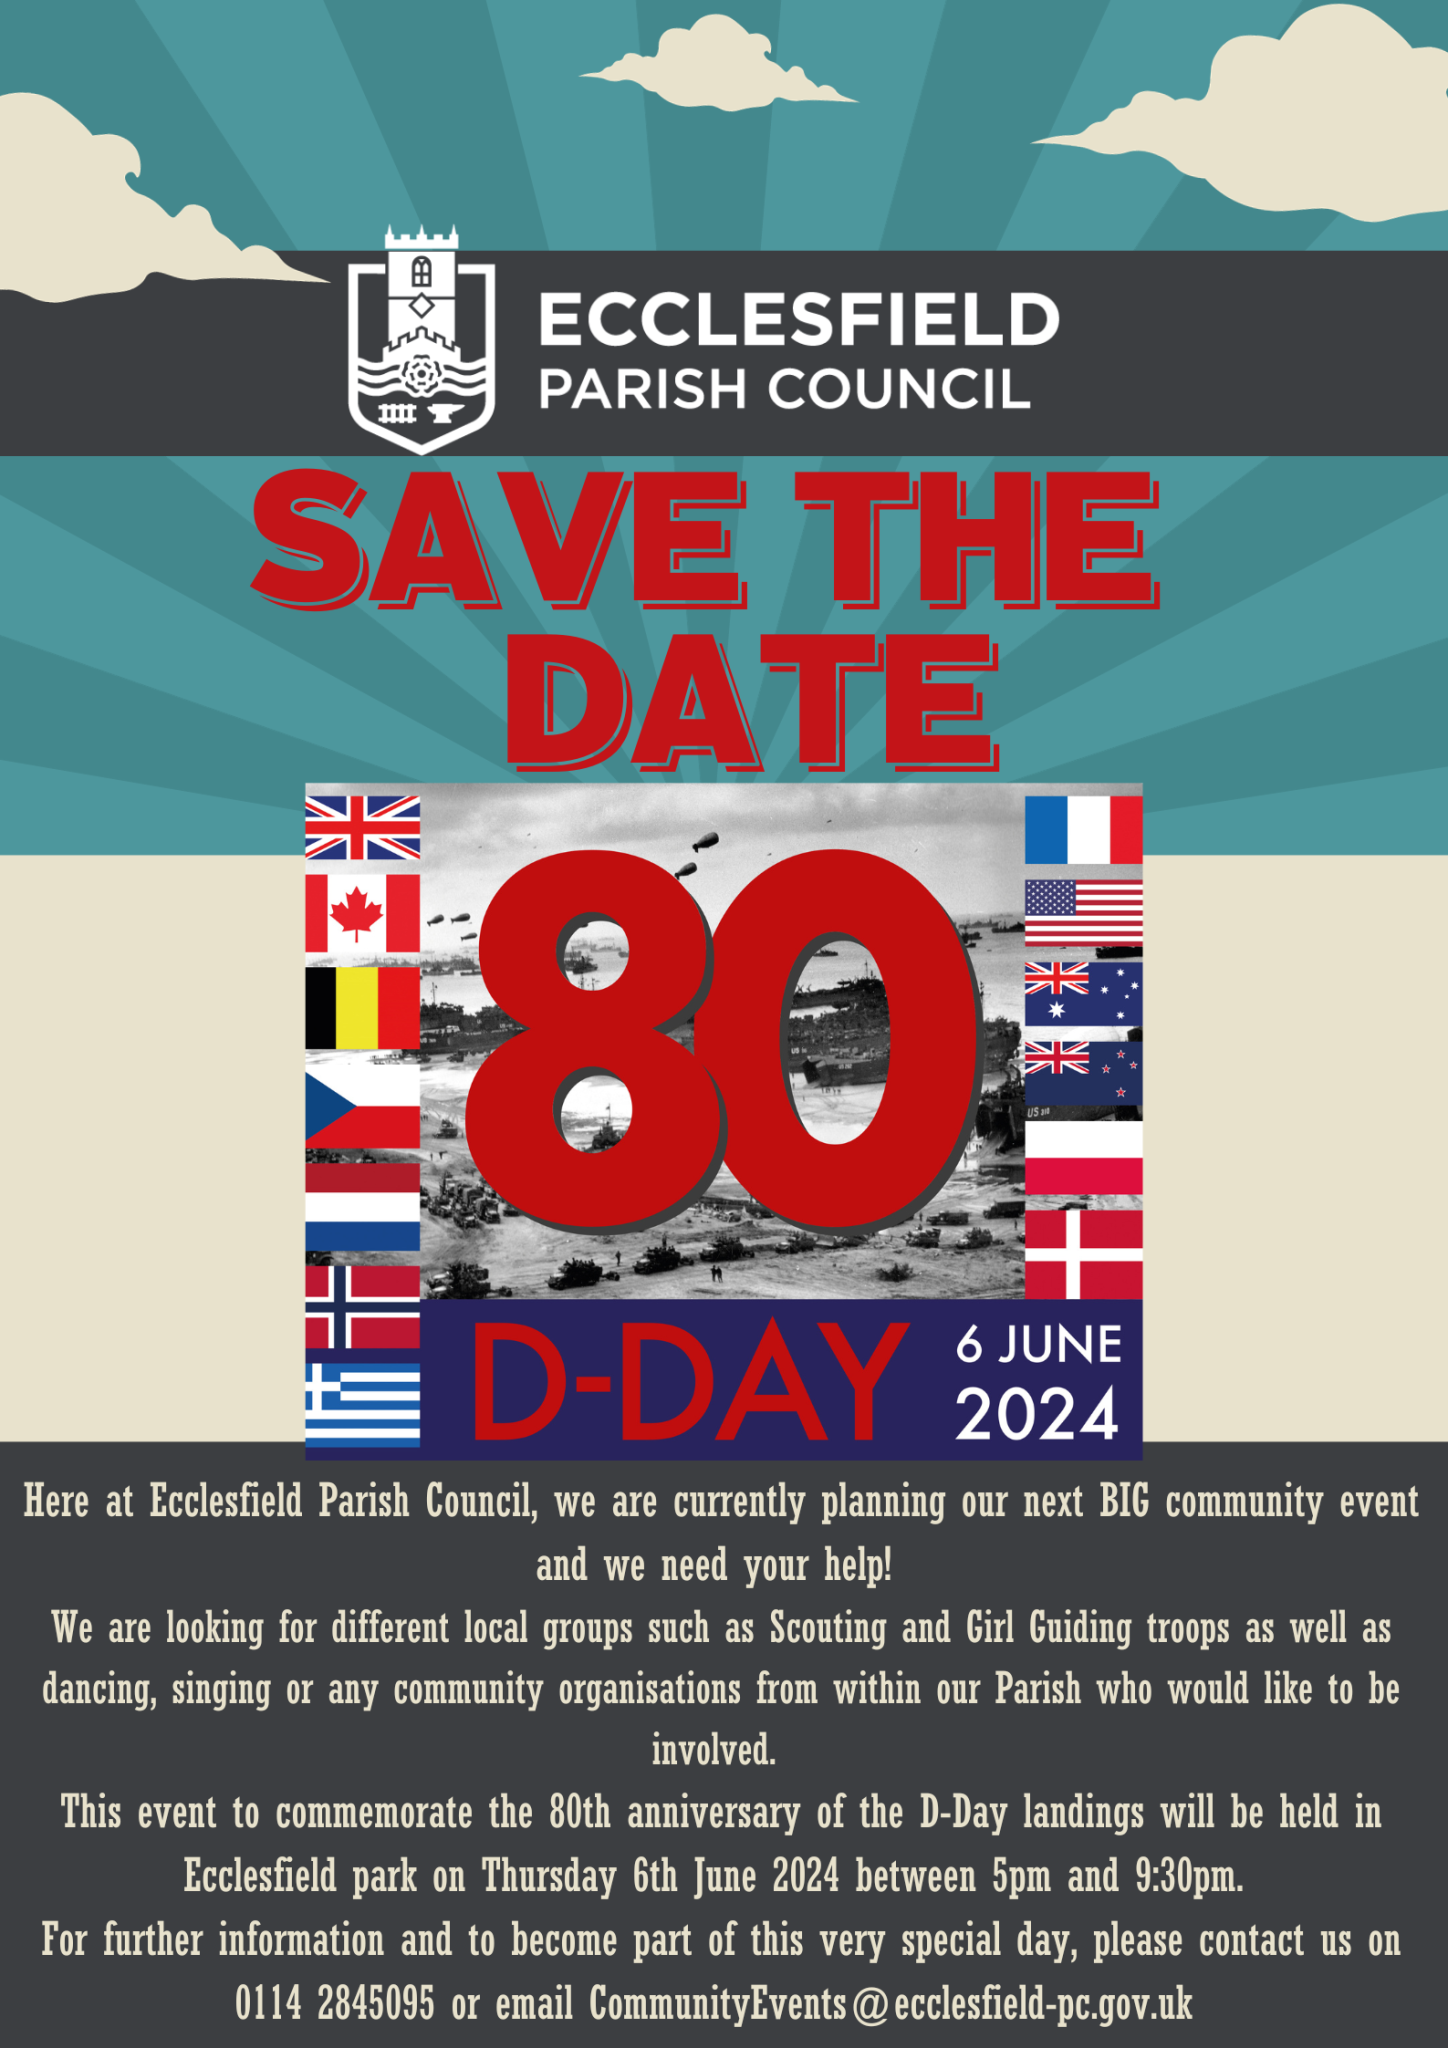 SAVE THE DATE DDAY 80 2024 Ecclesfield Parish Council